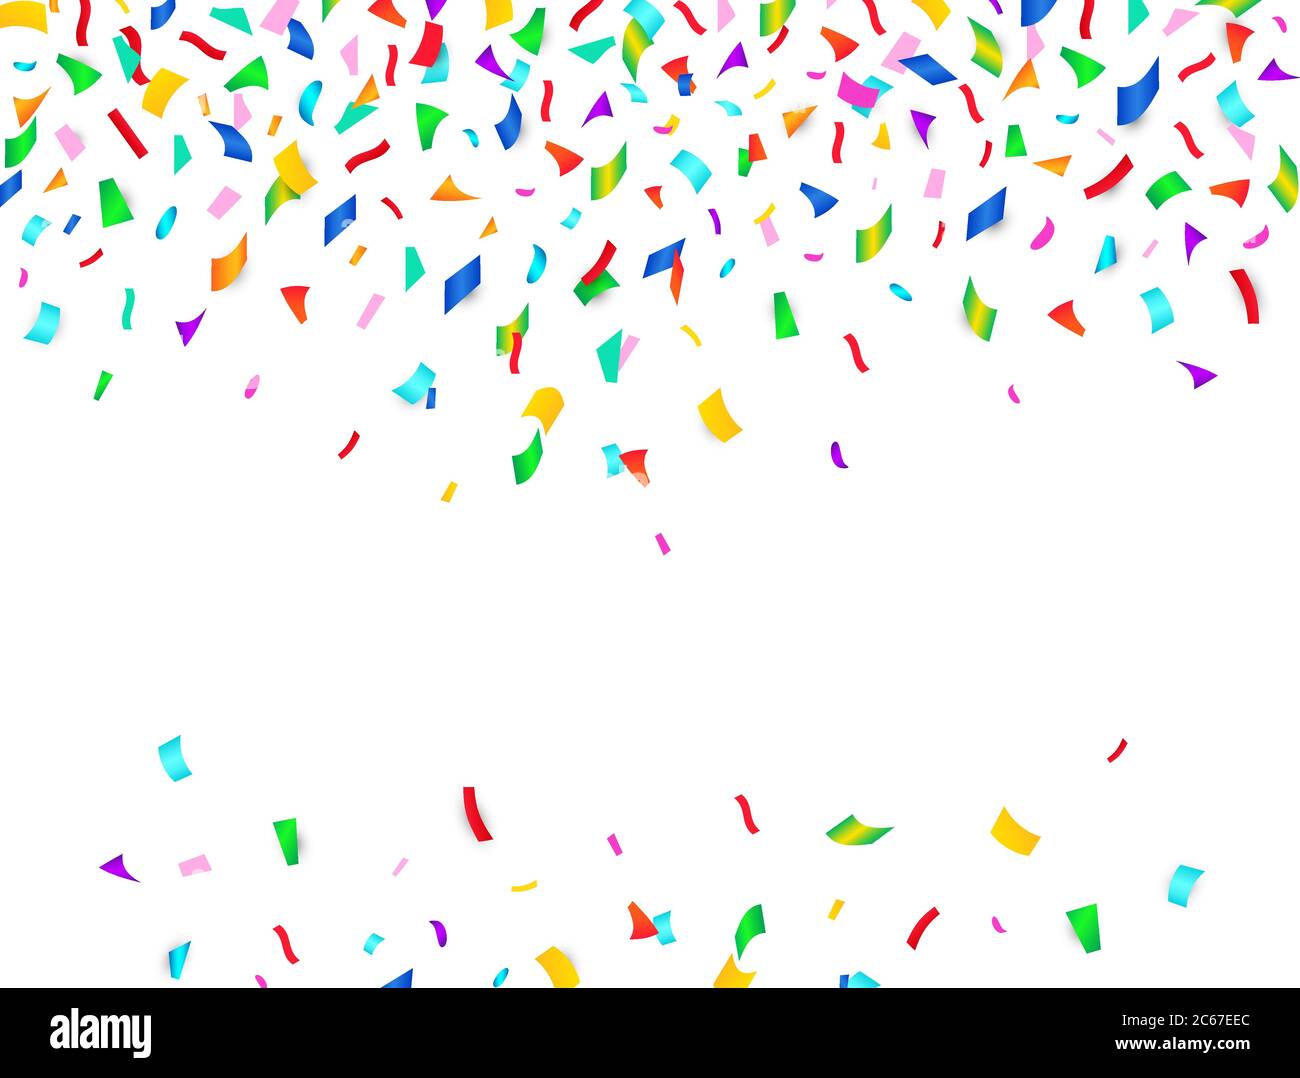 Abstract background with colorful falling confetti. Vector illustration. Stock Vector